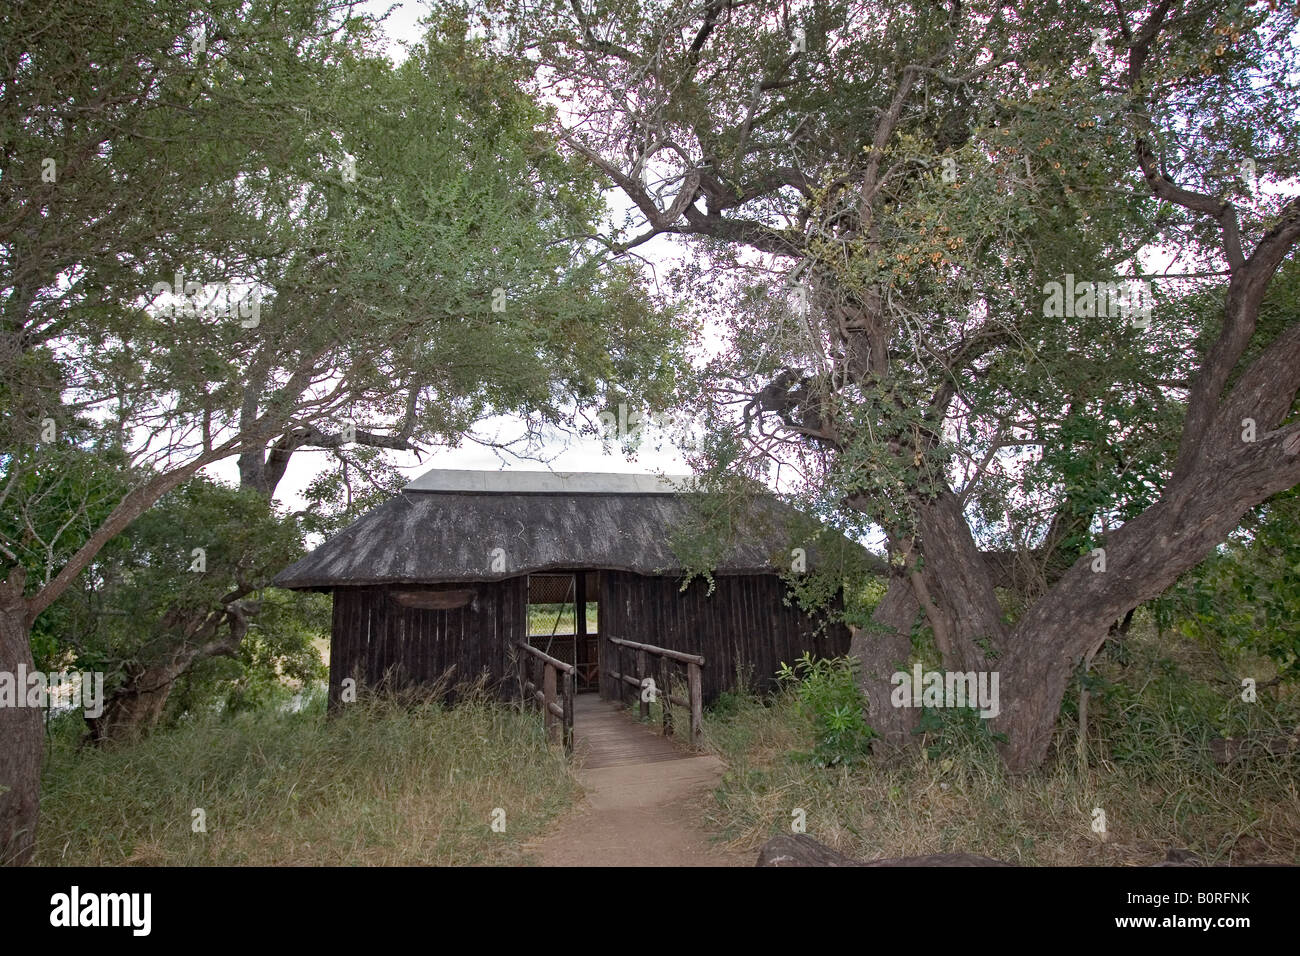 The Rattel Pan 'Hide' in the Kruger National Park. Stock Photo